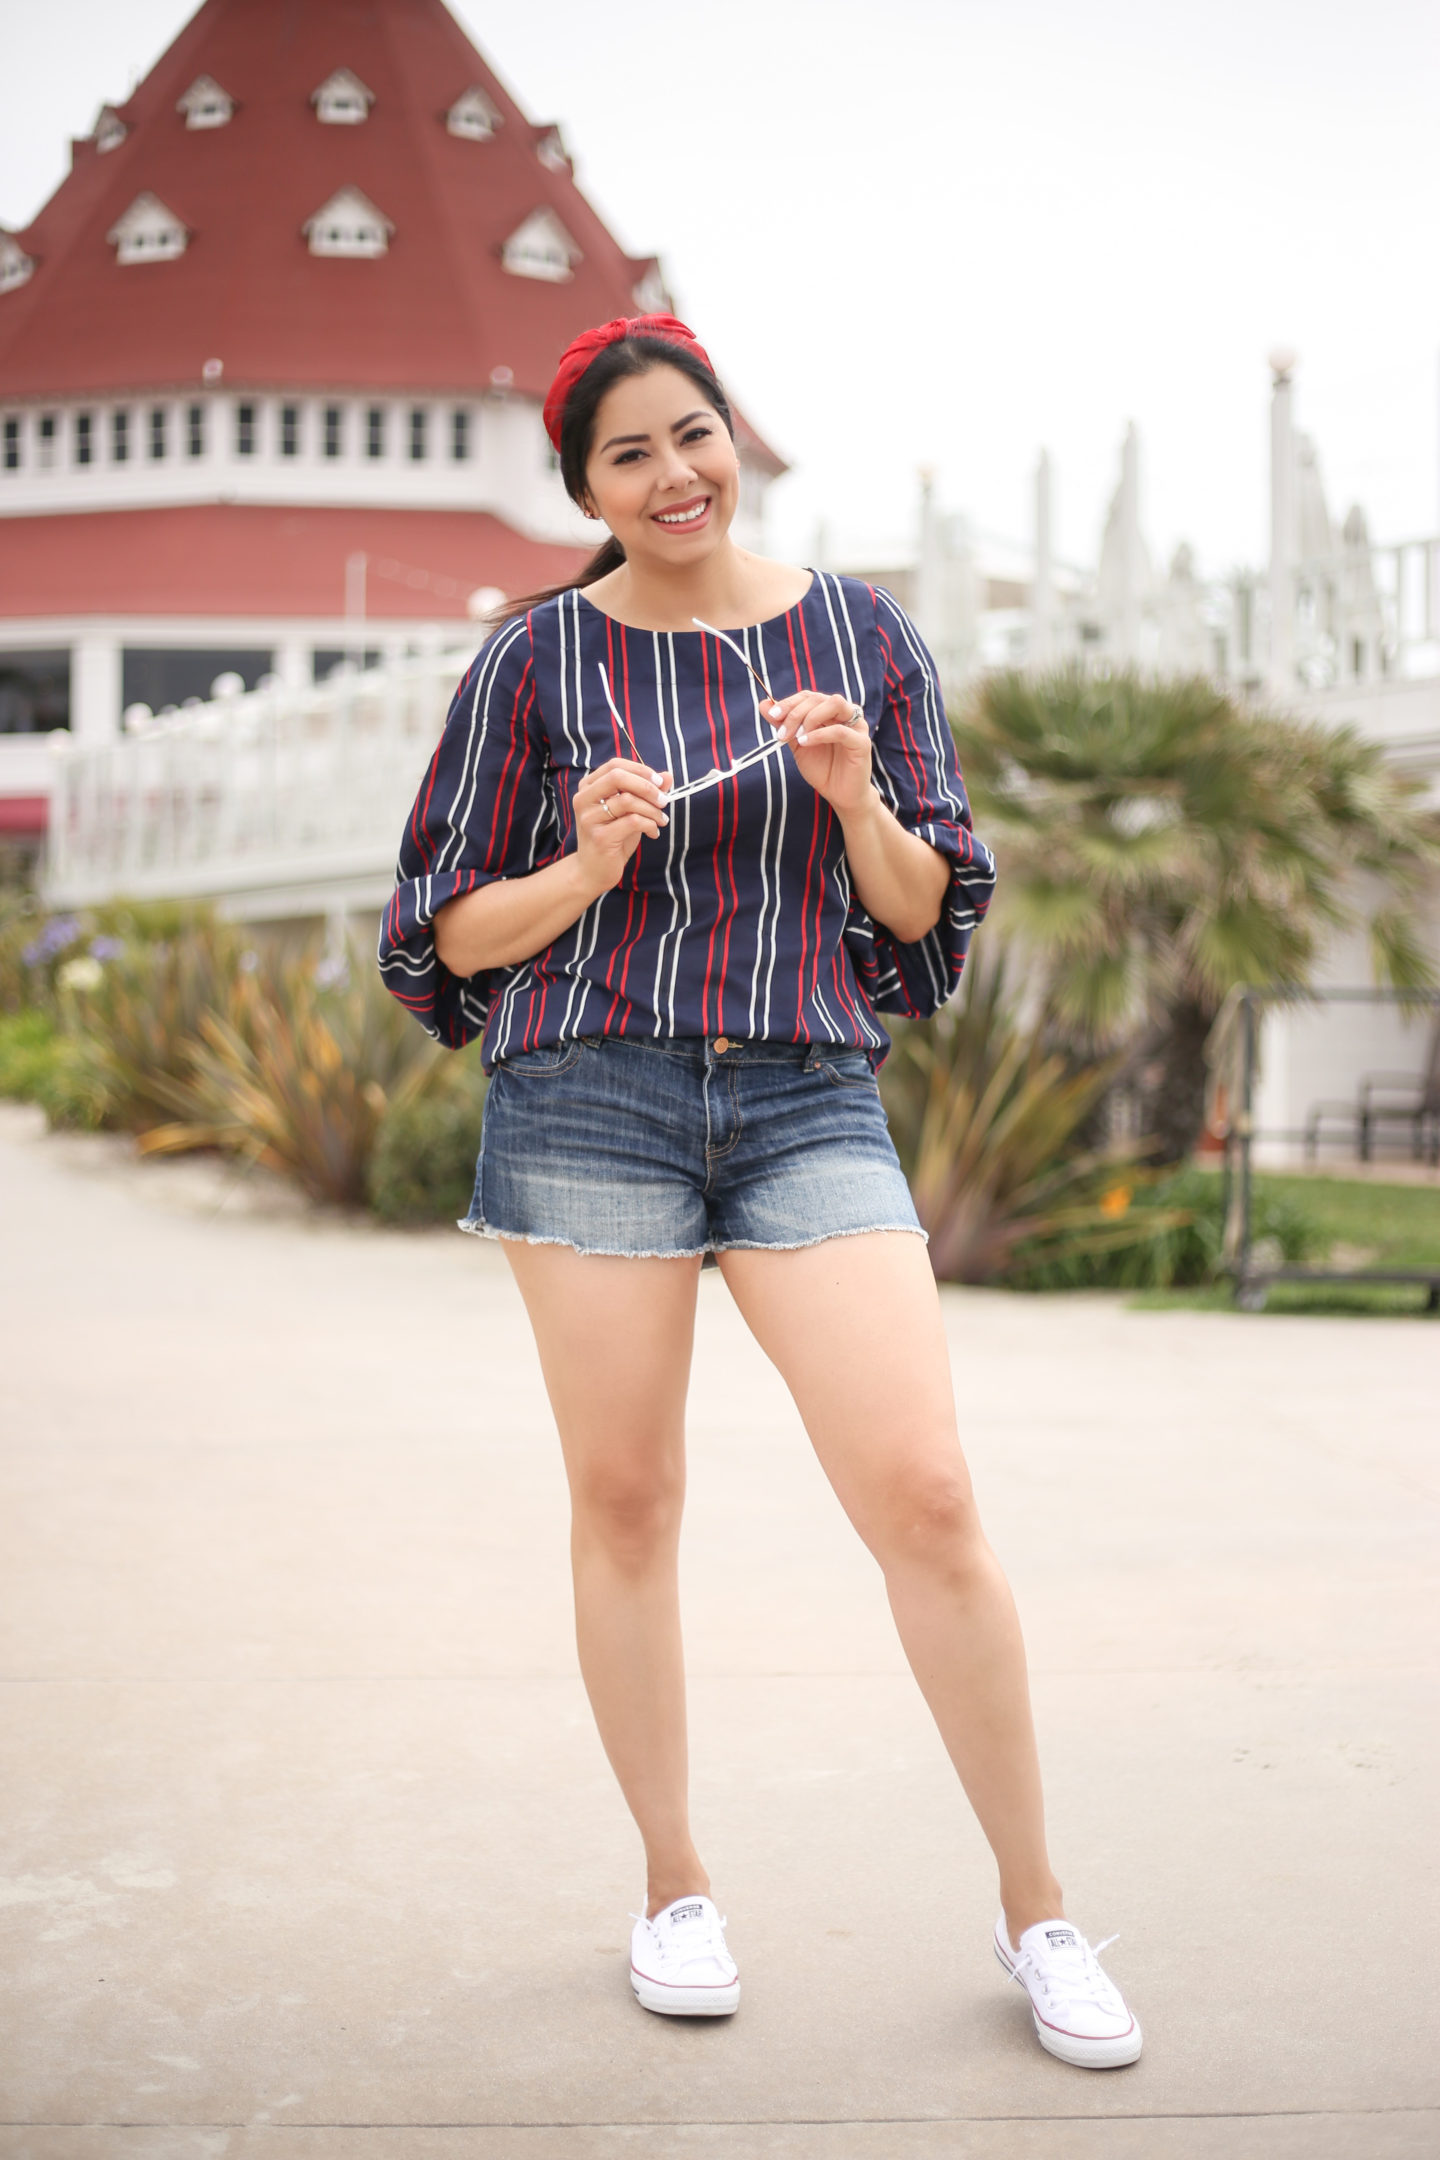 fourth of july outfit idea featuring distressed jeans and striped top